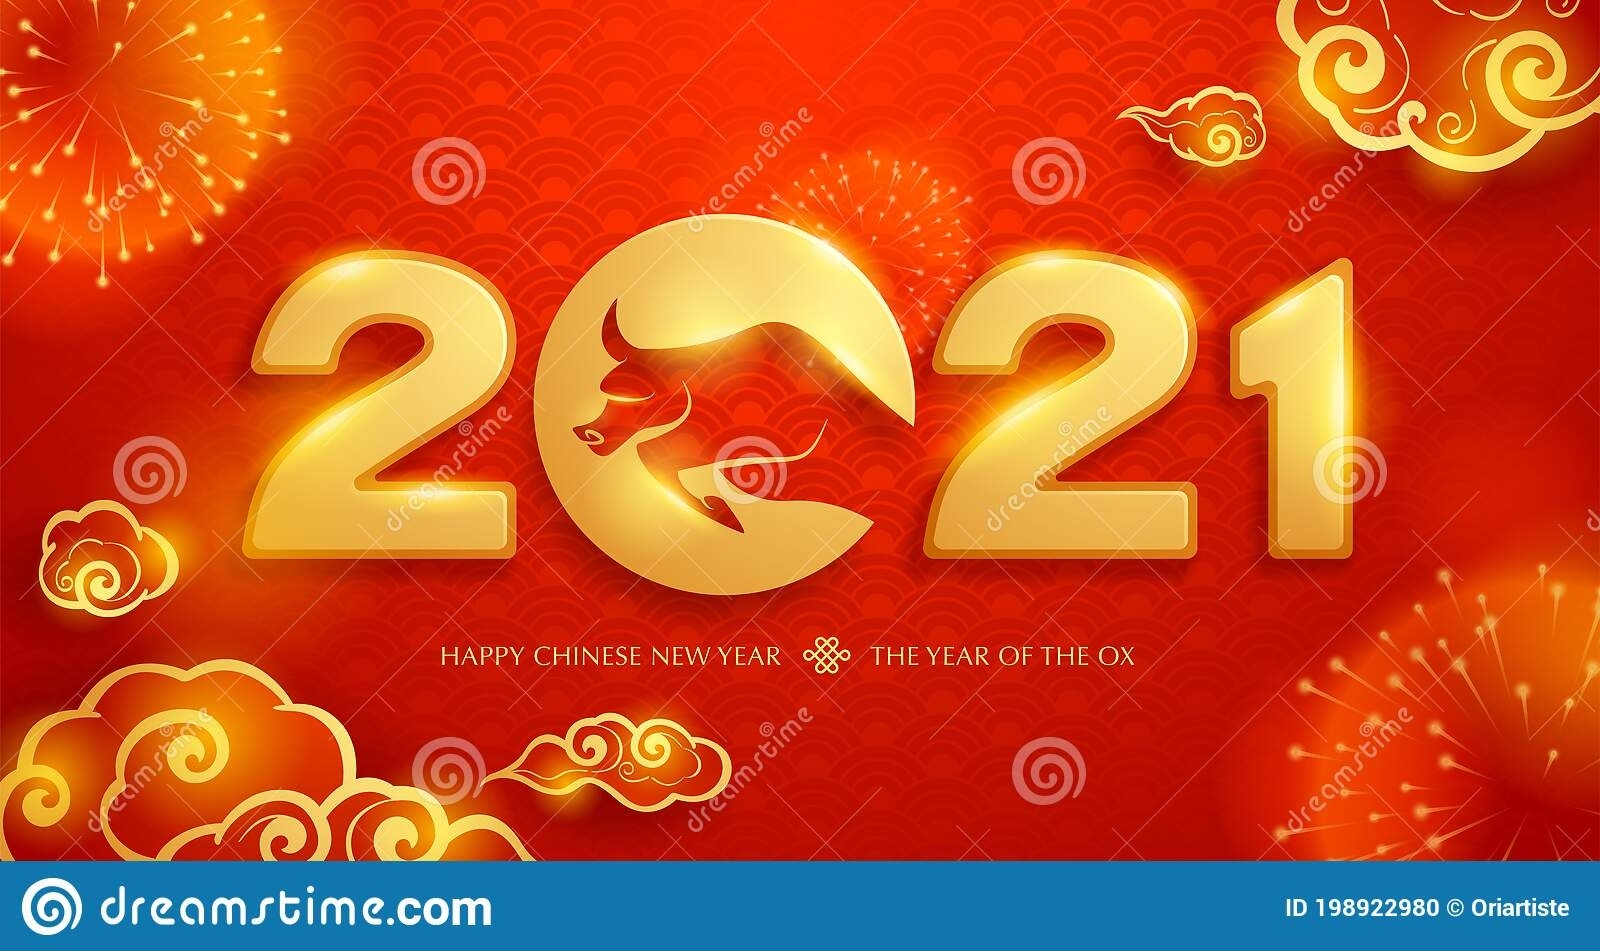 Happy Chinese New Year 2021. Year Of The Ox. Stock Vector